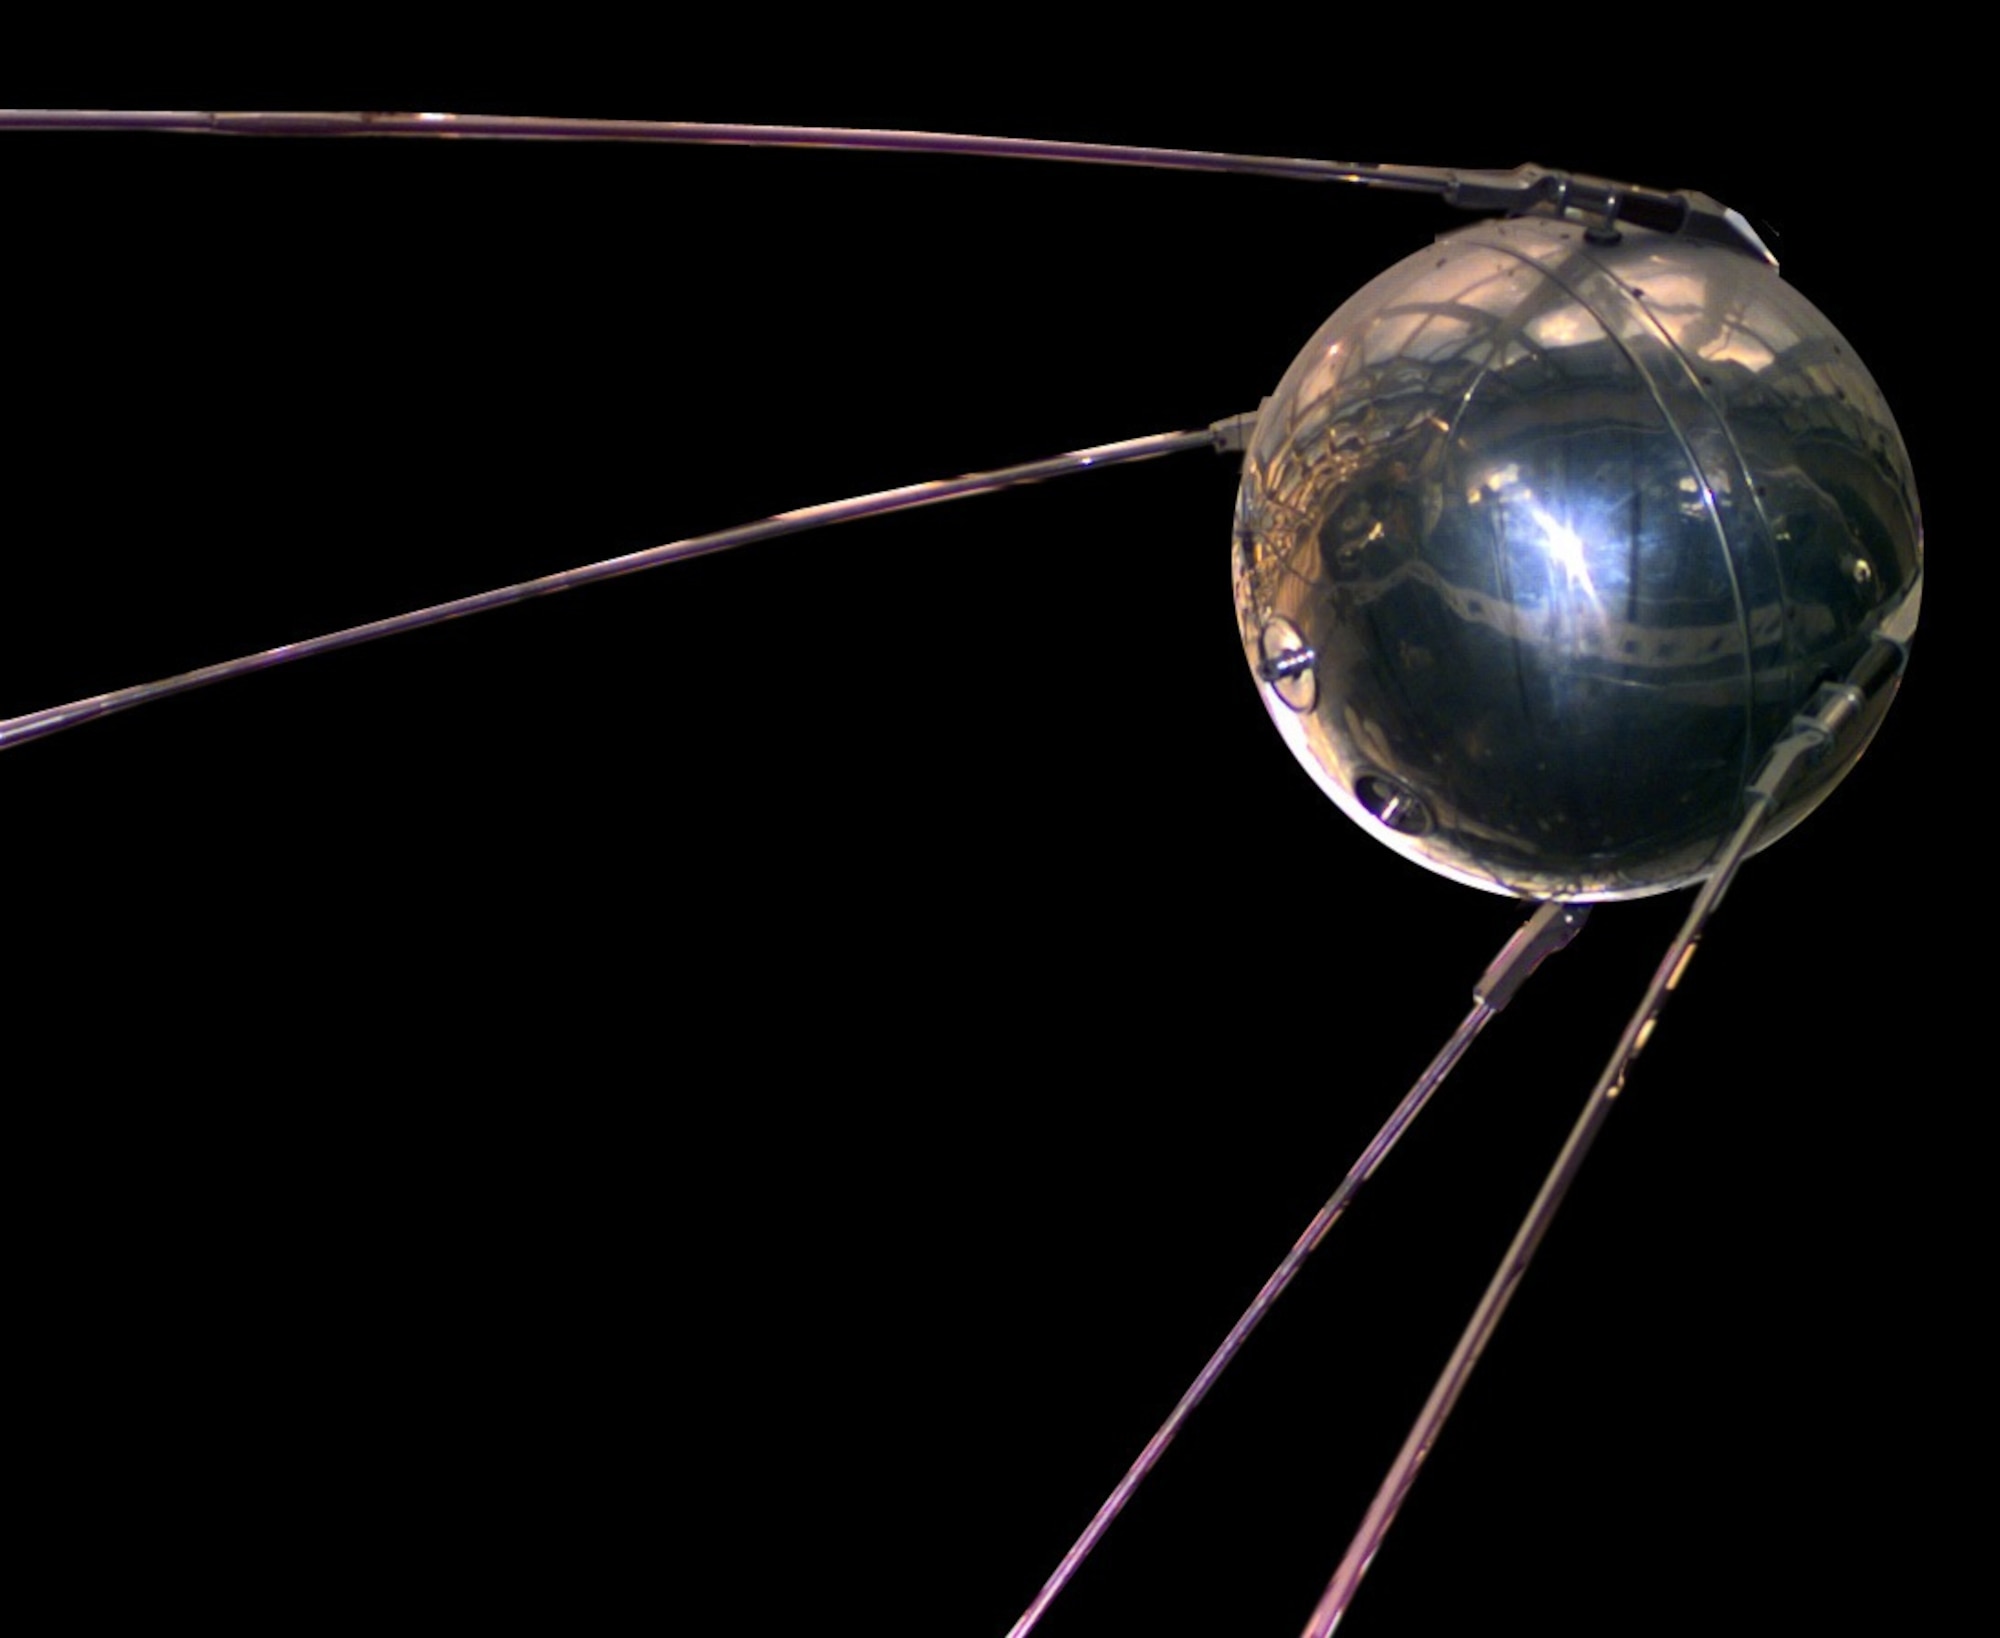 The Sputnik 1 replica which is on display at the National Air and Space Museum in Washington D.C. (NASA photo)